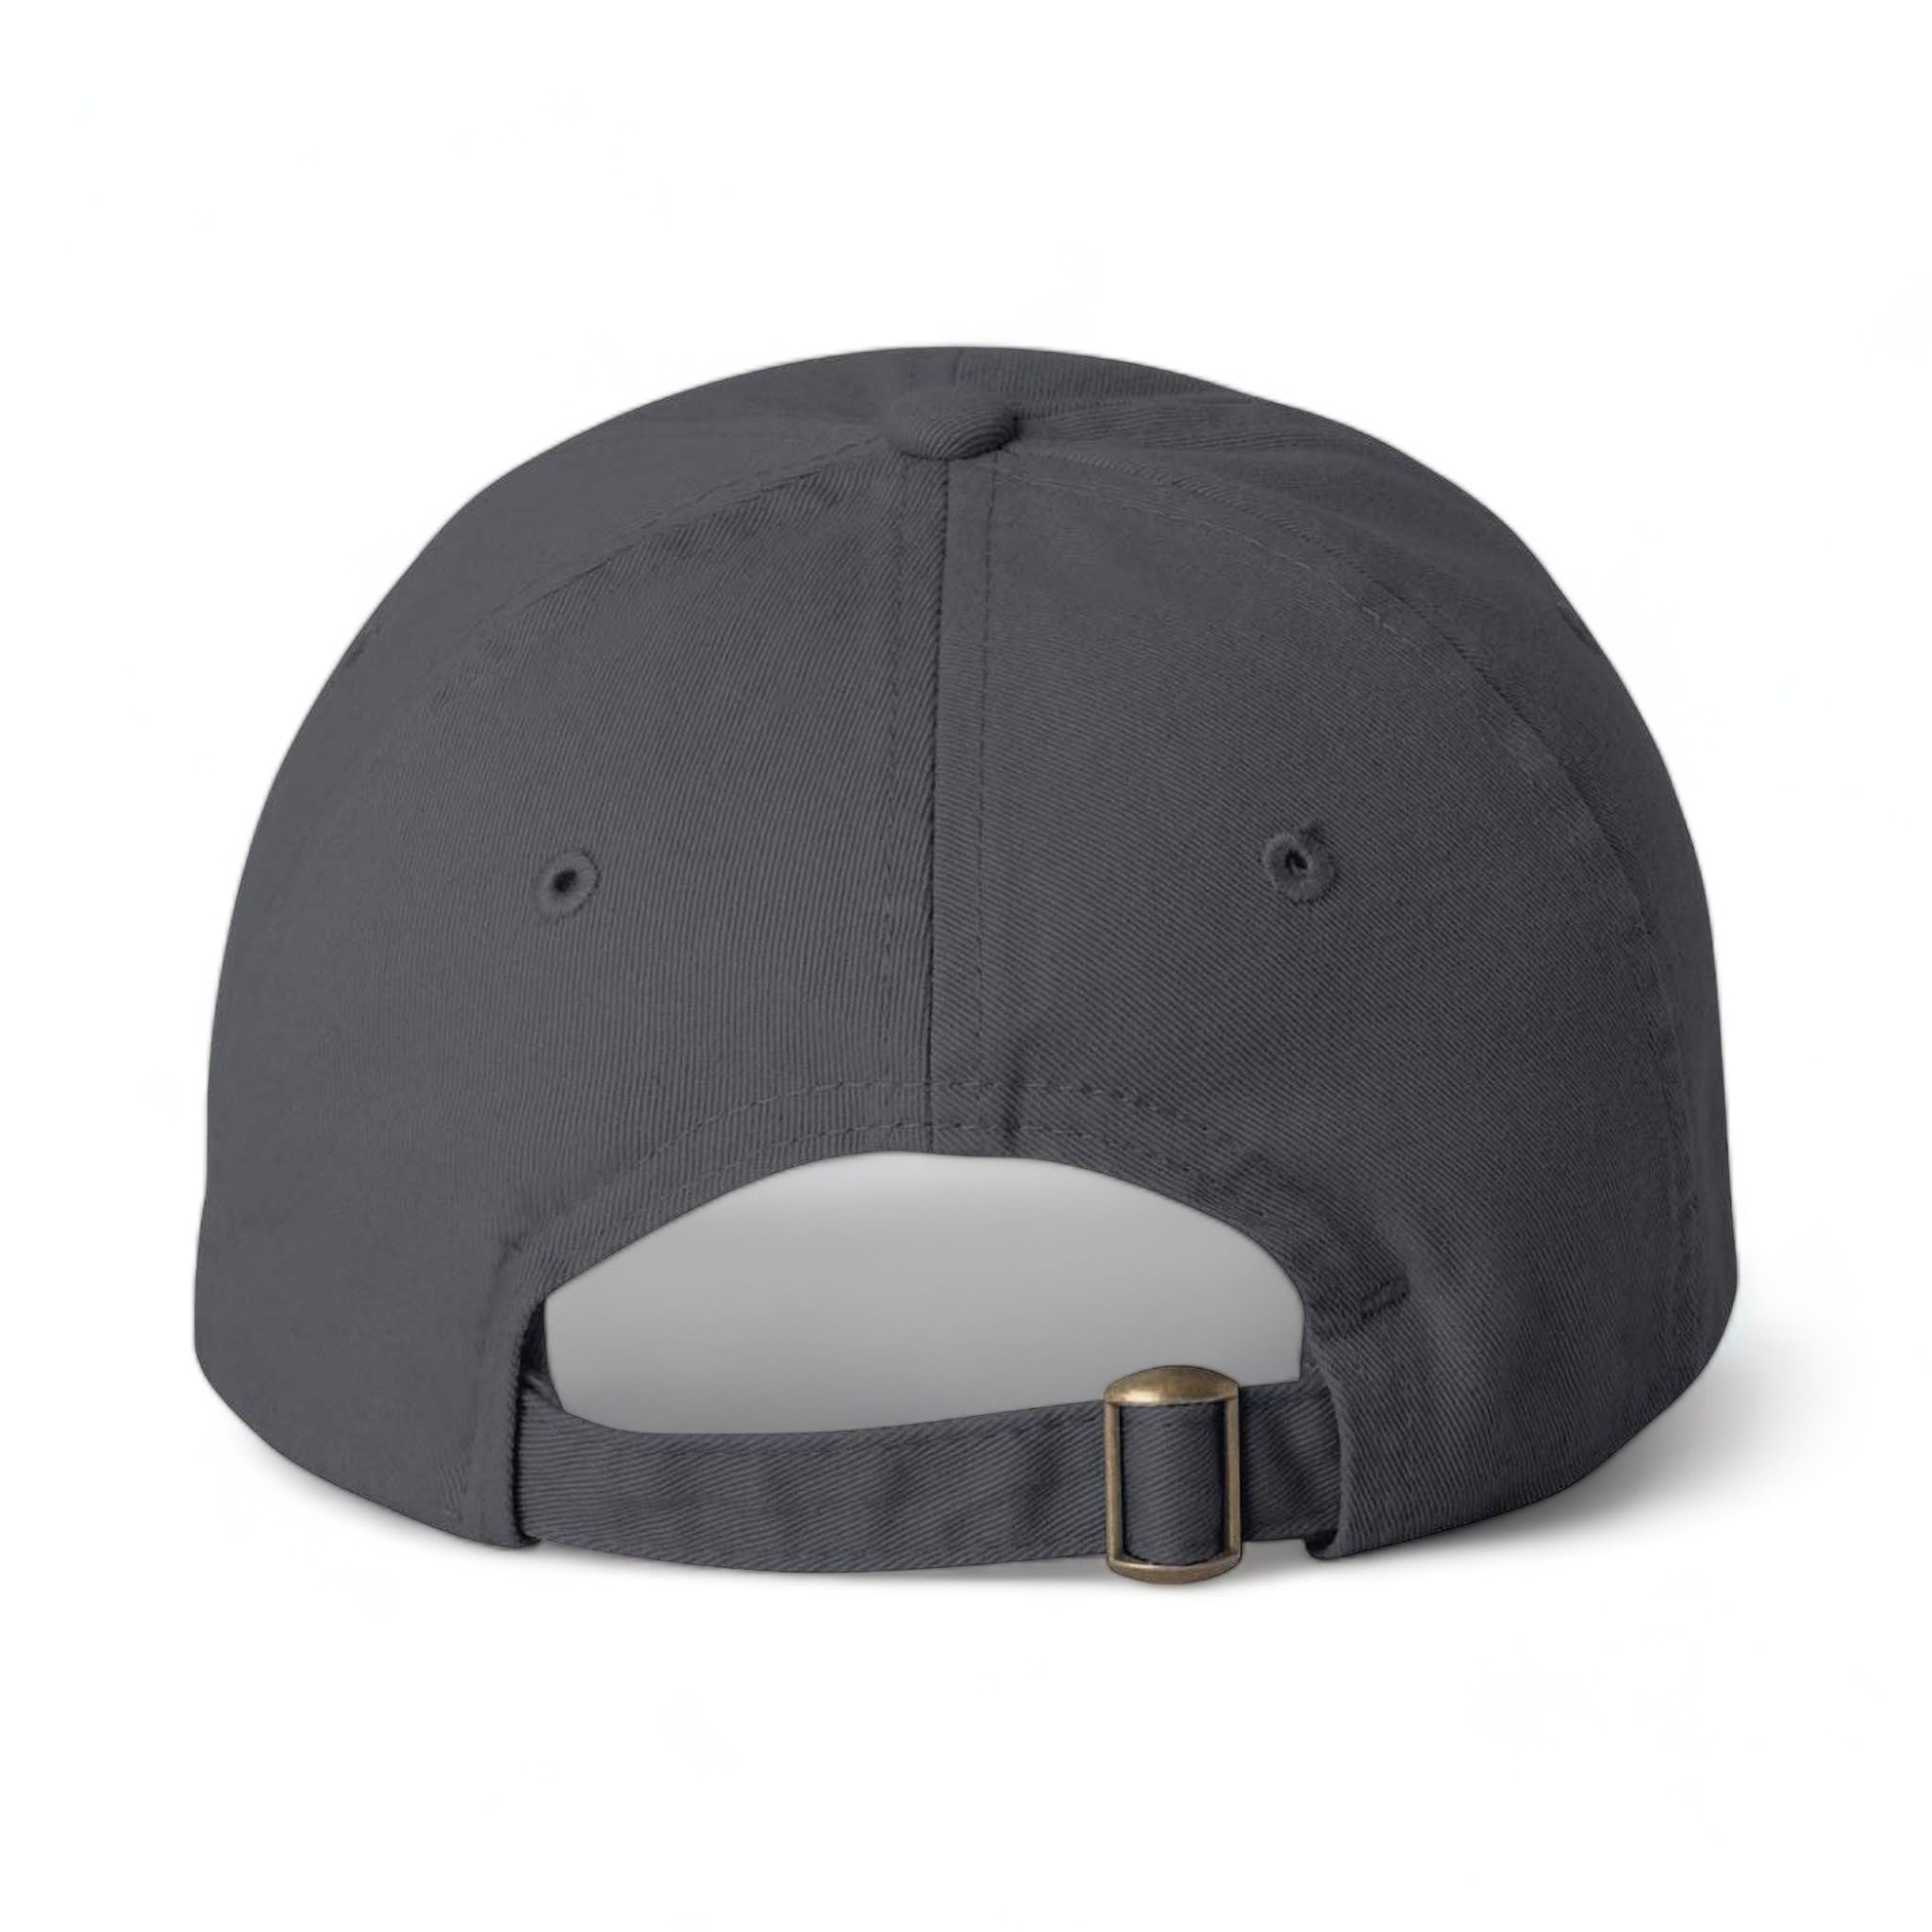 Back view of Valucap VC300A custom hat in charcoal